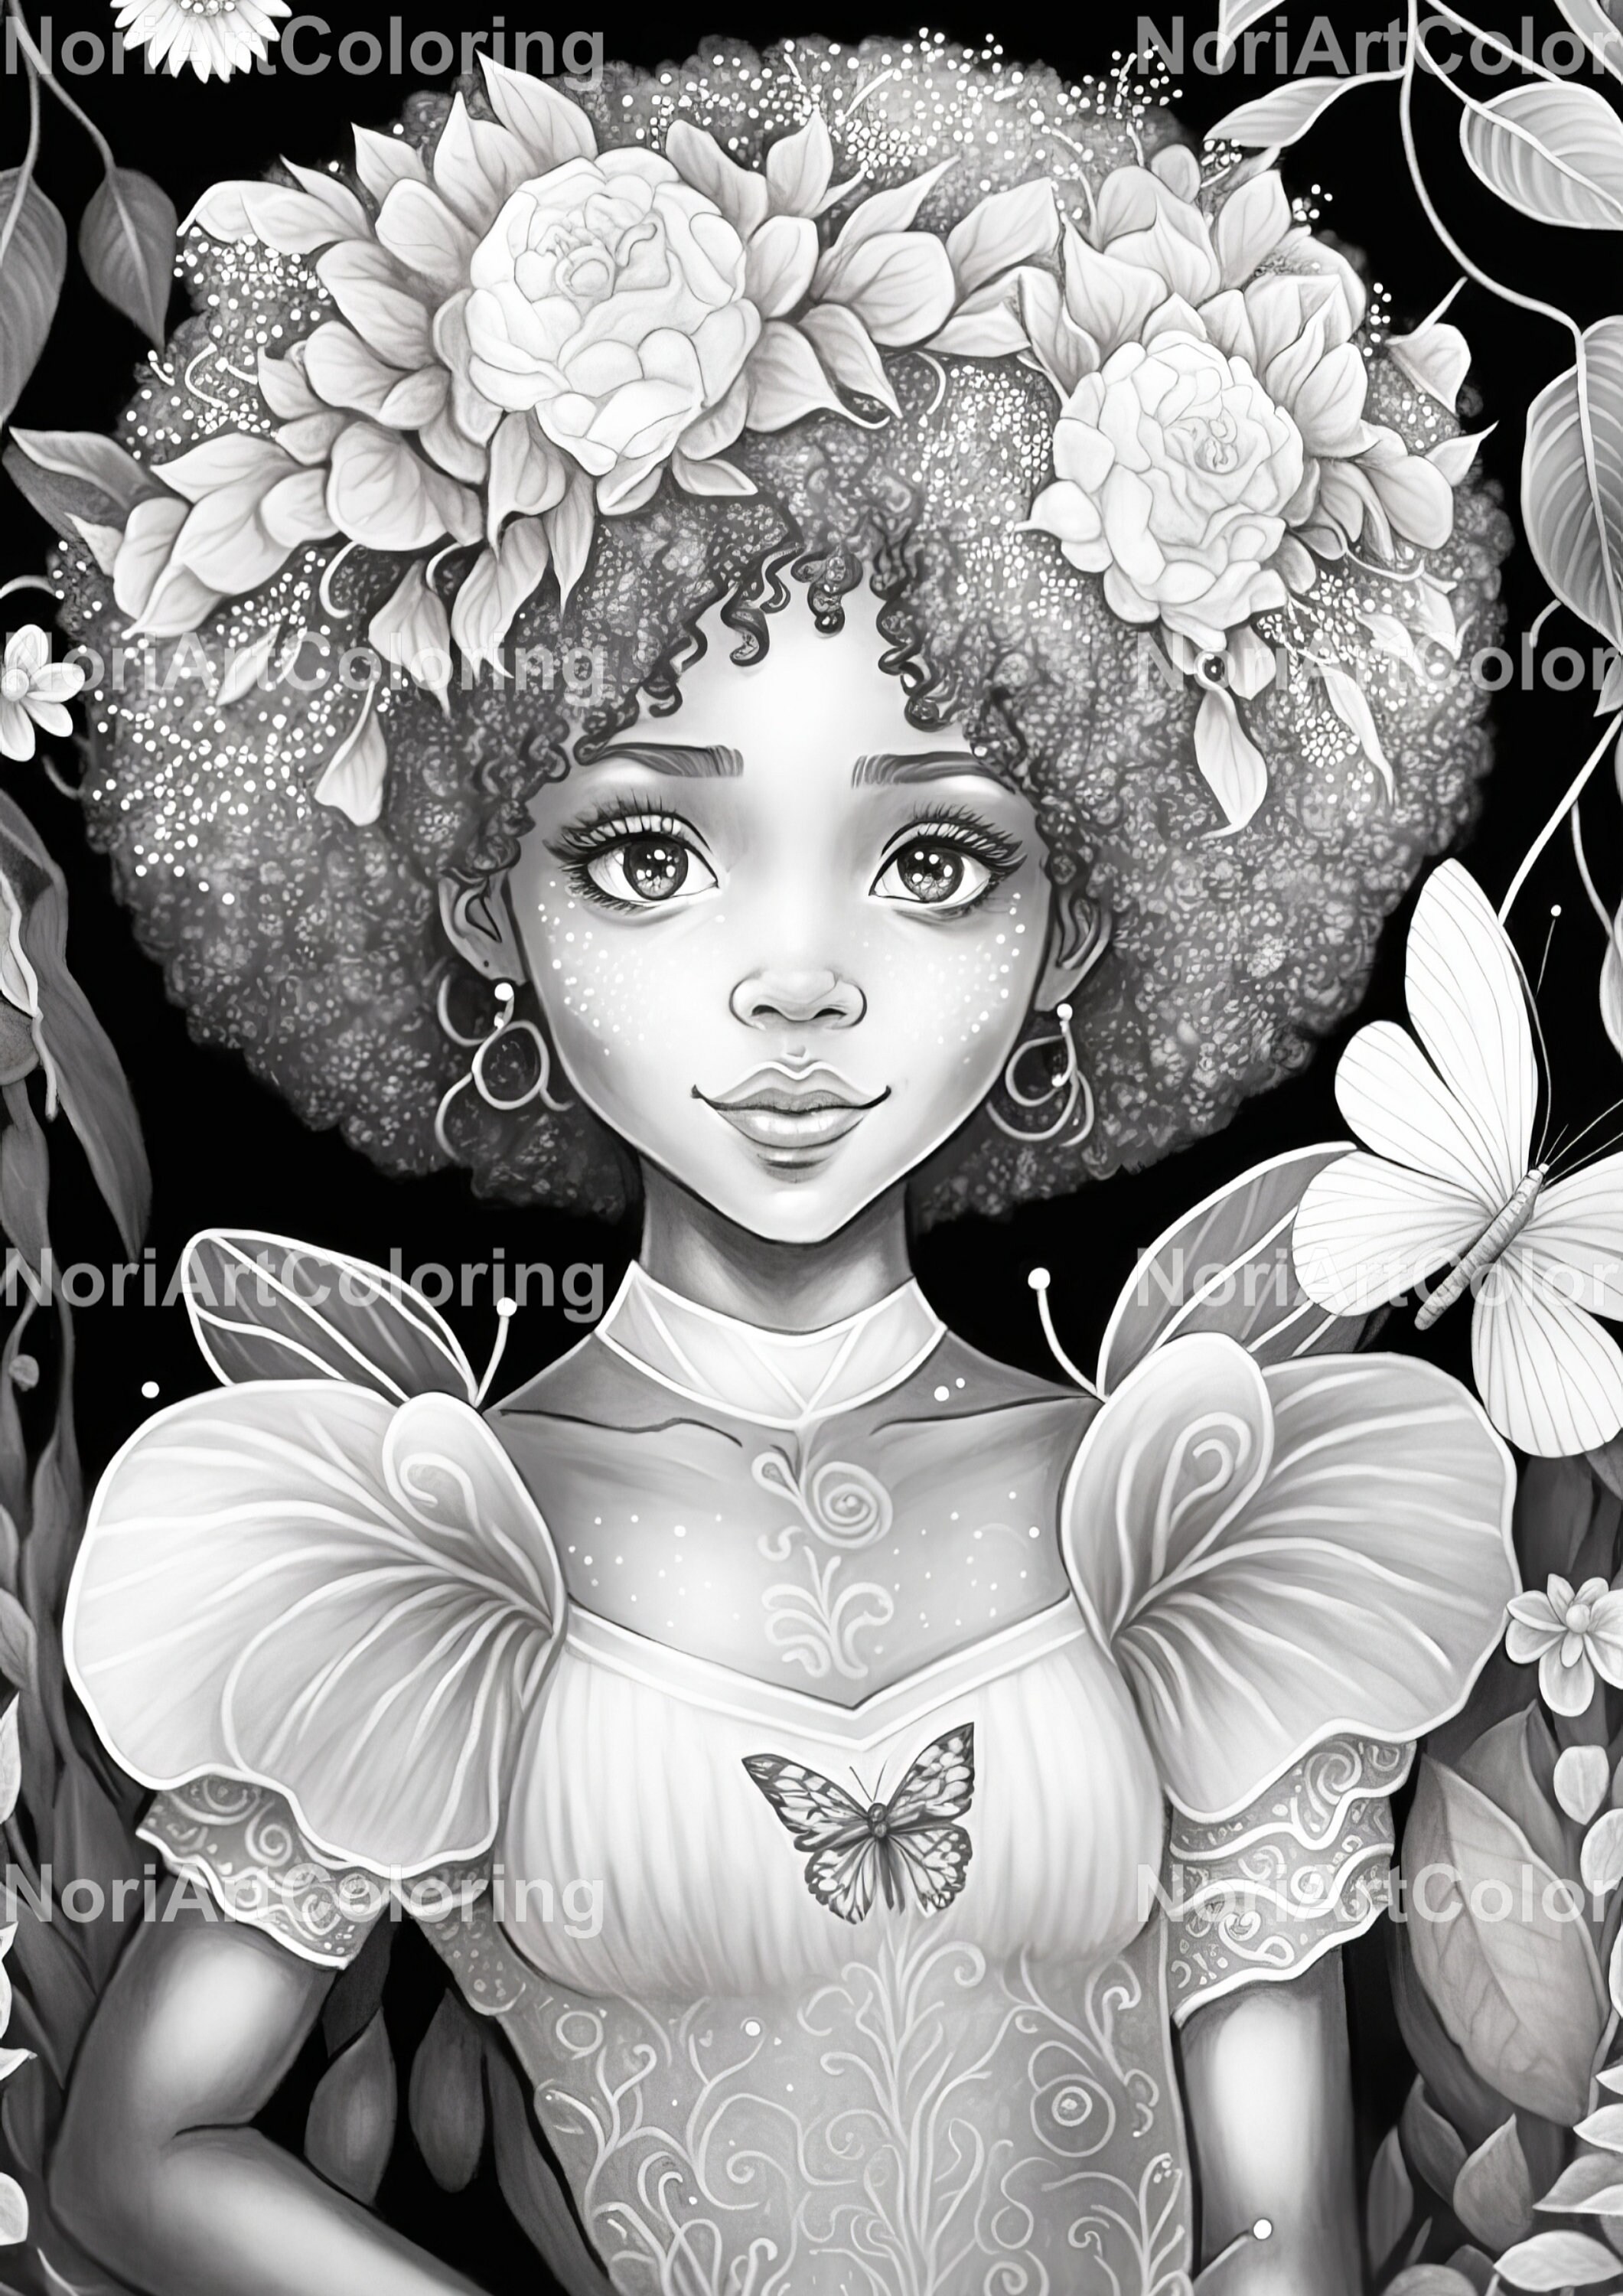  Black Girl Coloring Book For Adults: 28 Beautiful and Elegant  Black Women Grayscale Illustrations with Floral Backgrounds: 9798375184142:  Vibe, Trixie: Books